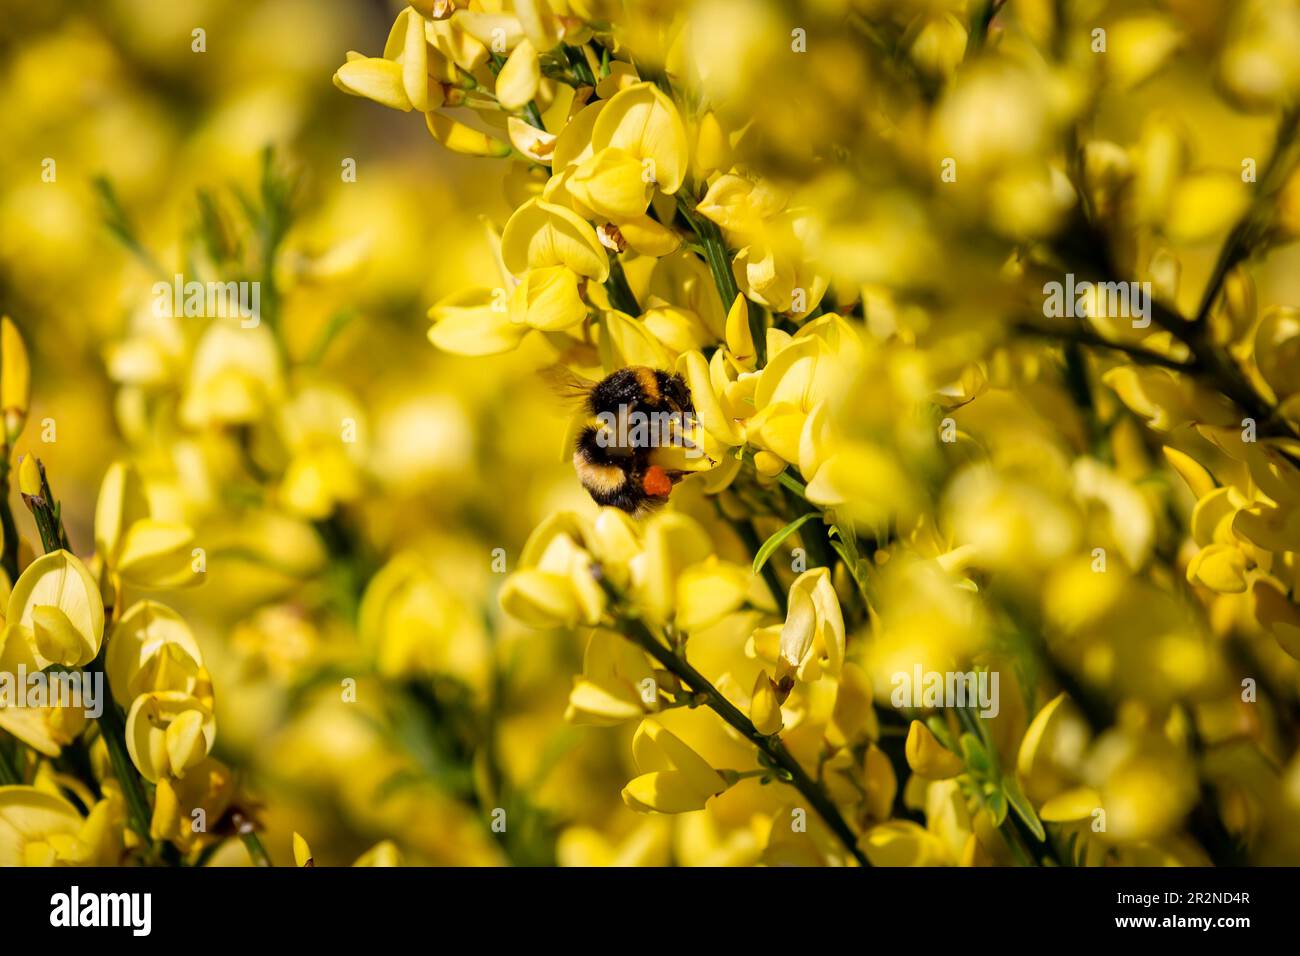 A bee with a visible pollen basket collecting pollen from a scotch broom plant in springtime Stock Photo